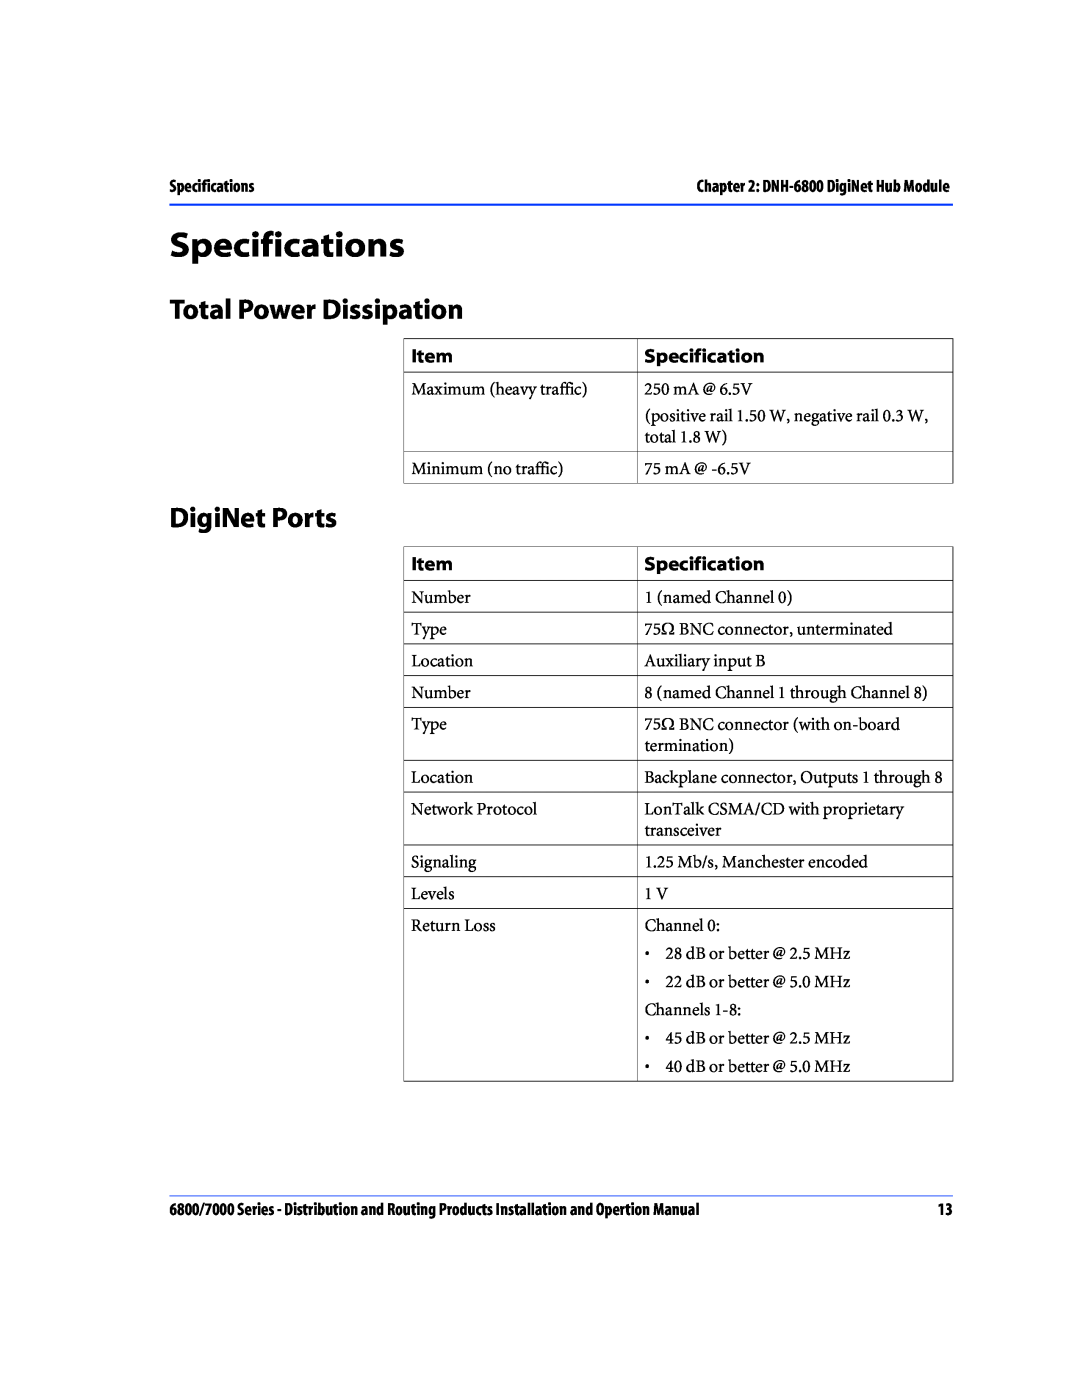 Nokia 6800 Series, 7000 Series operation manual Total Power Dissipation, DigiNet Ports, Specifications 